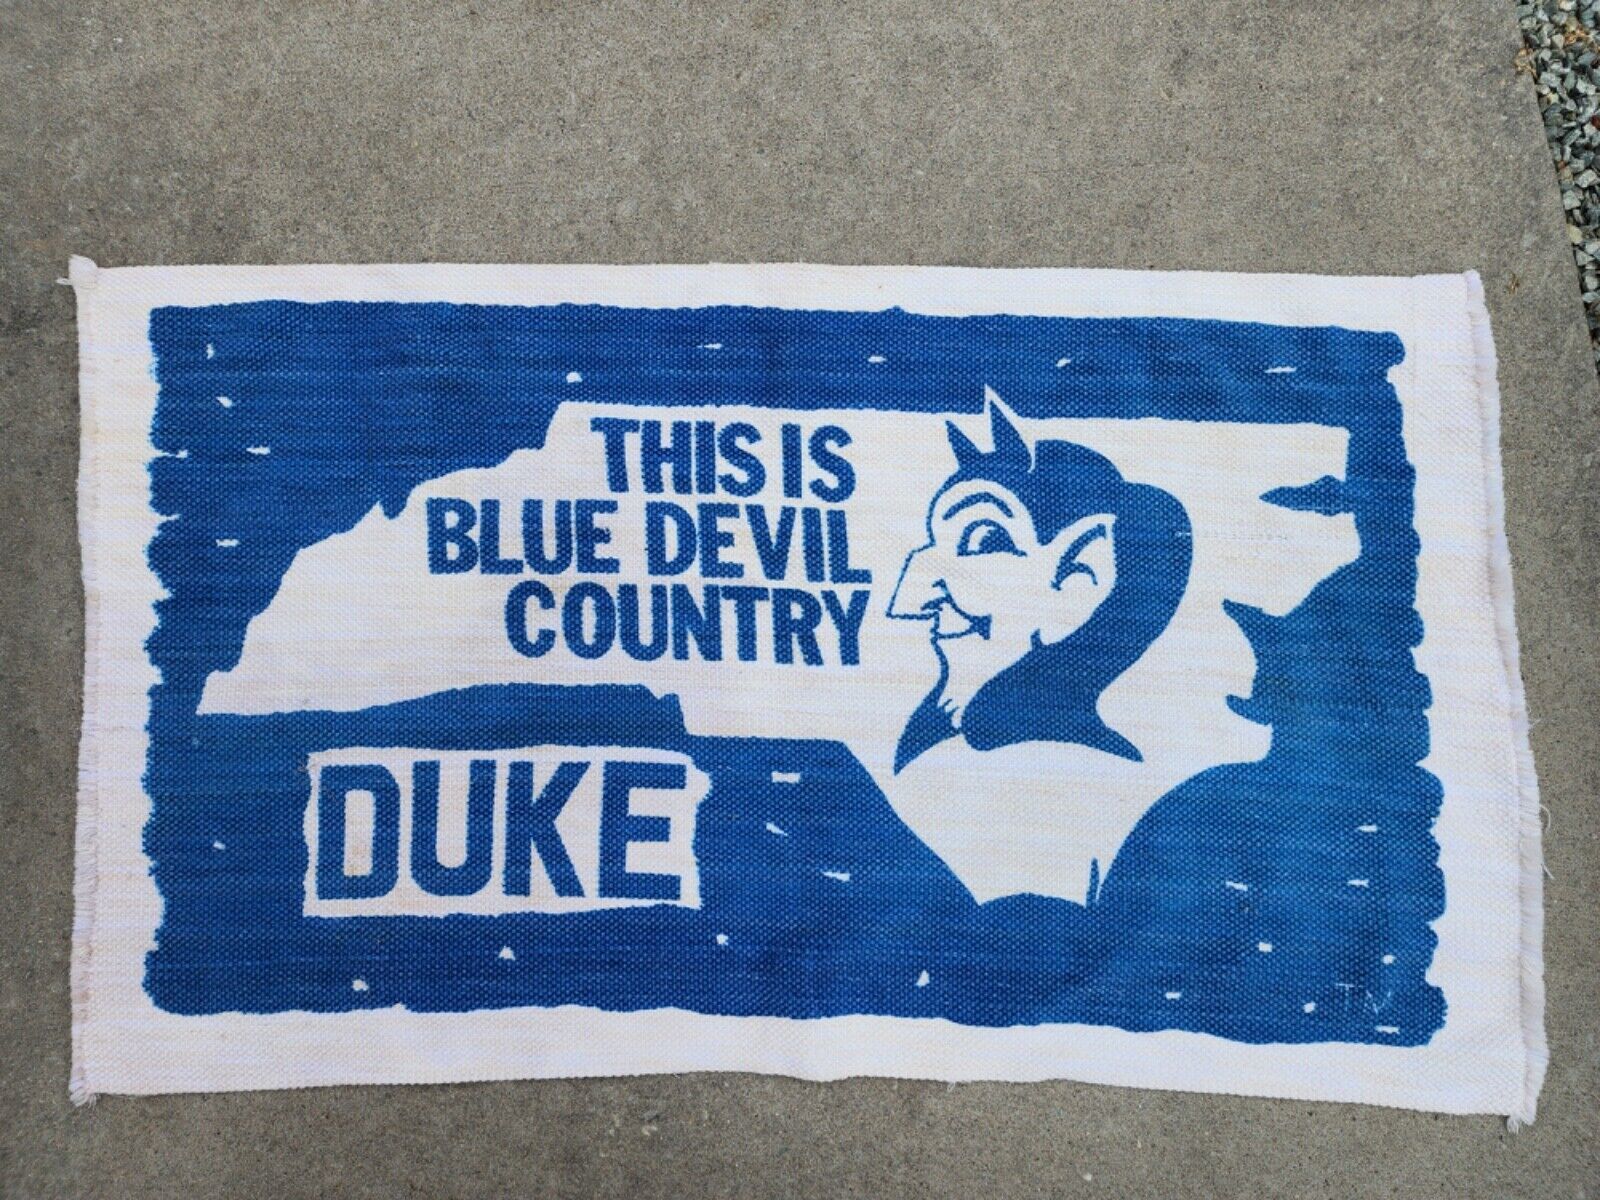 Primary image for Vintage Duke- This Is Blue Devil Country Rug Heavy Cloth  21”x42”